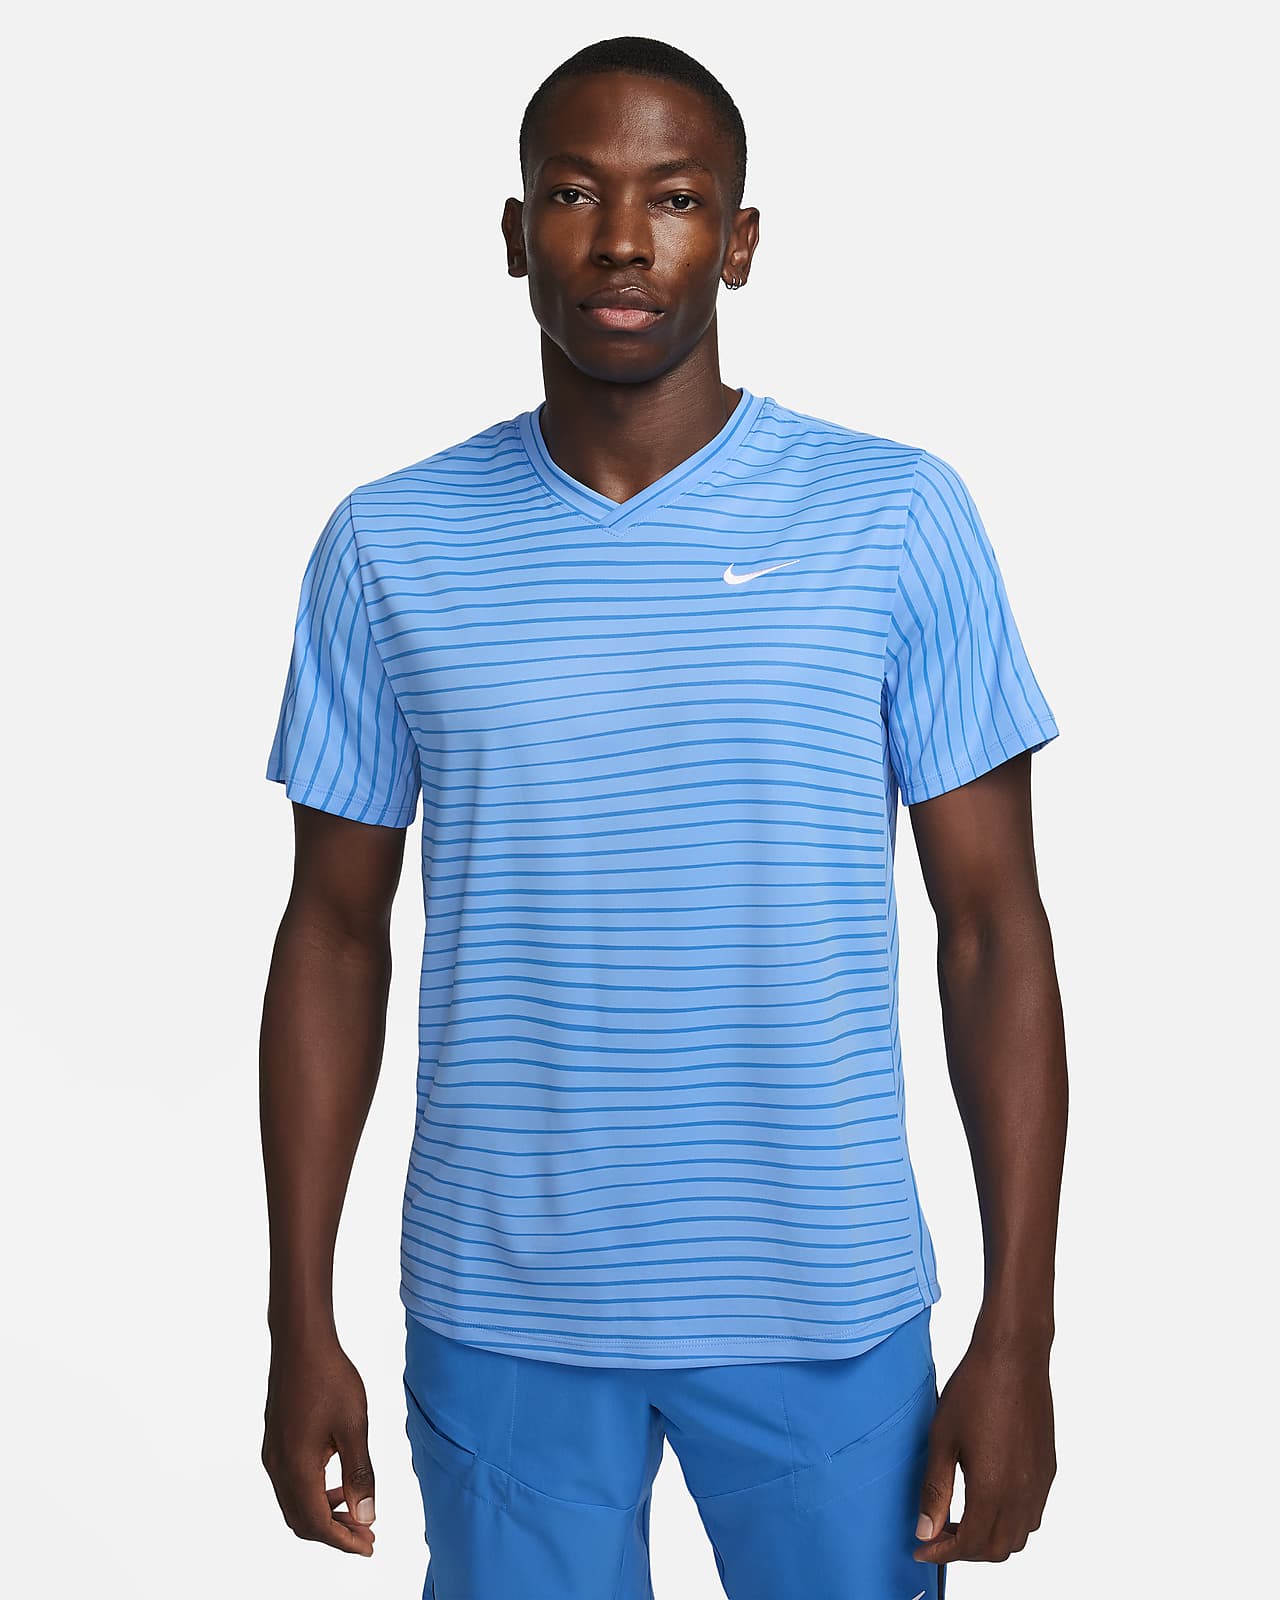 https://static.nike.com/a/images/t_PDP_1280_v1/f_auto,q_auto:eco/2c8e97e7-c009-4ffb-9b32-39fa799227e6/nikecourt-dri-fit-victory-tennis-top-hQvBDN.png